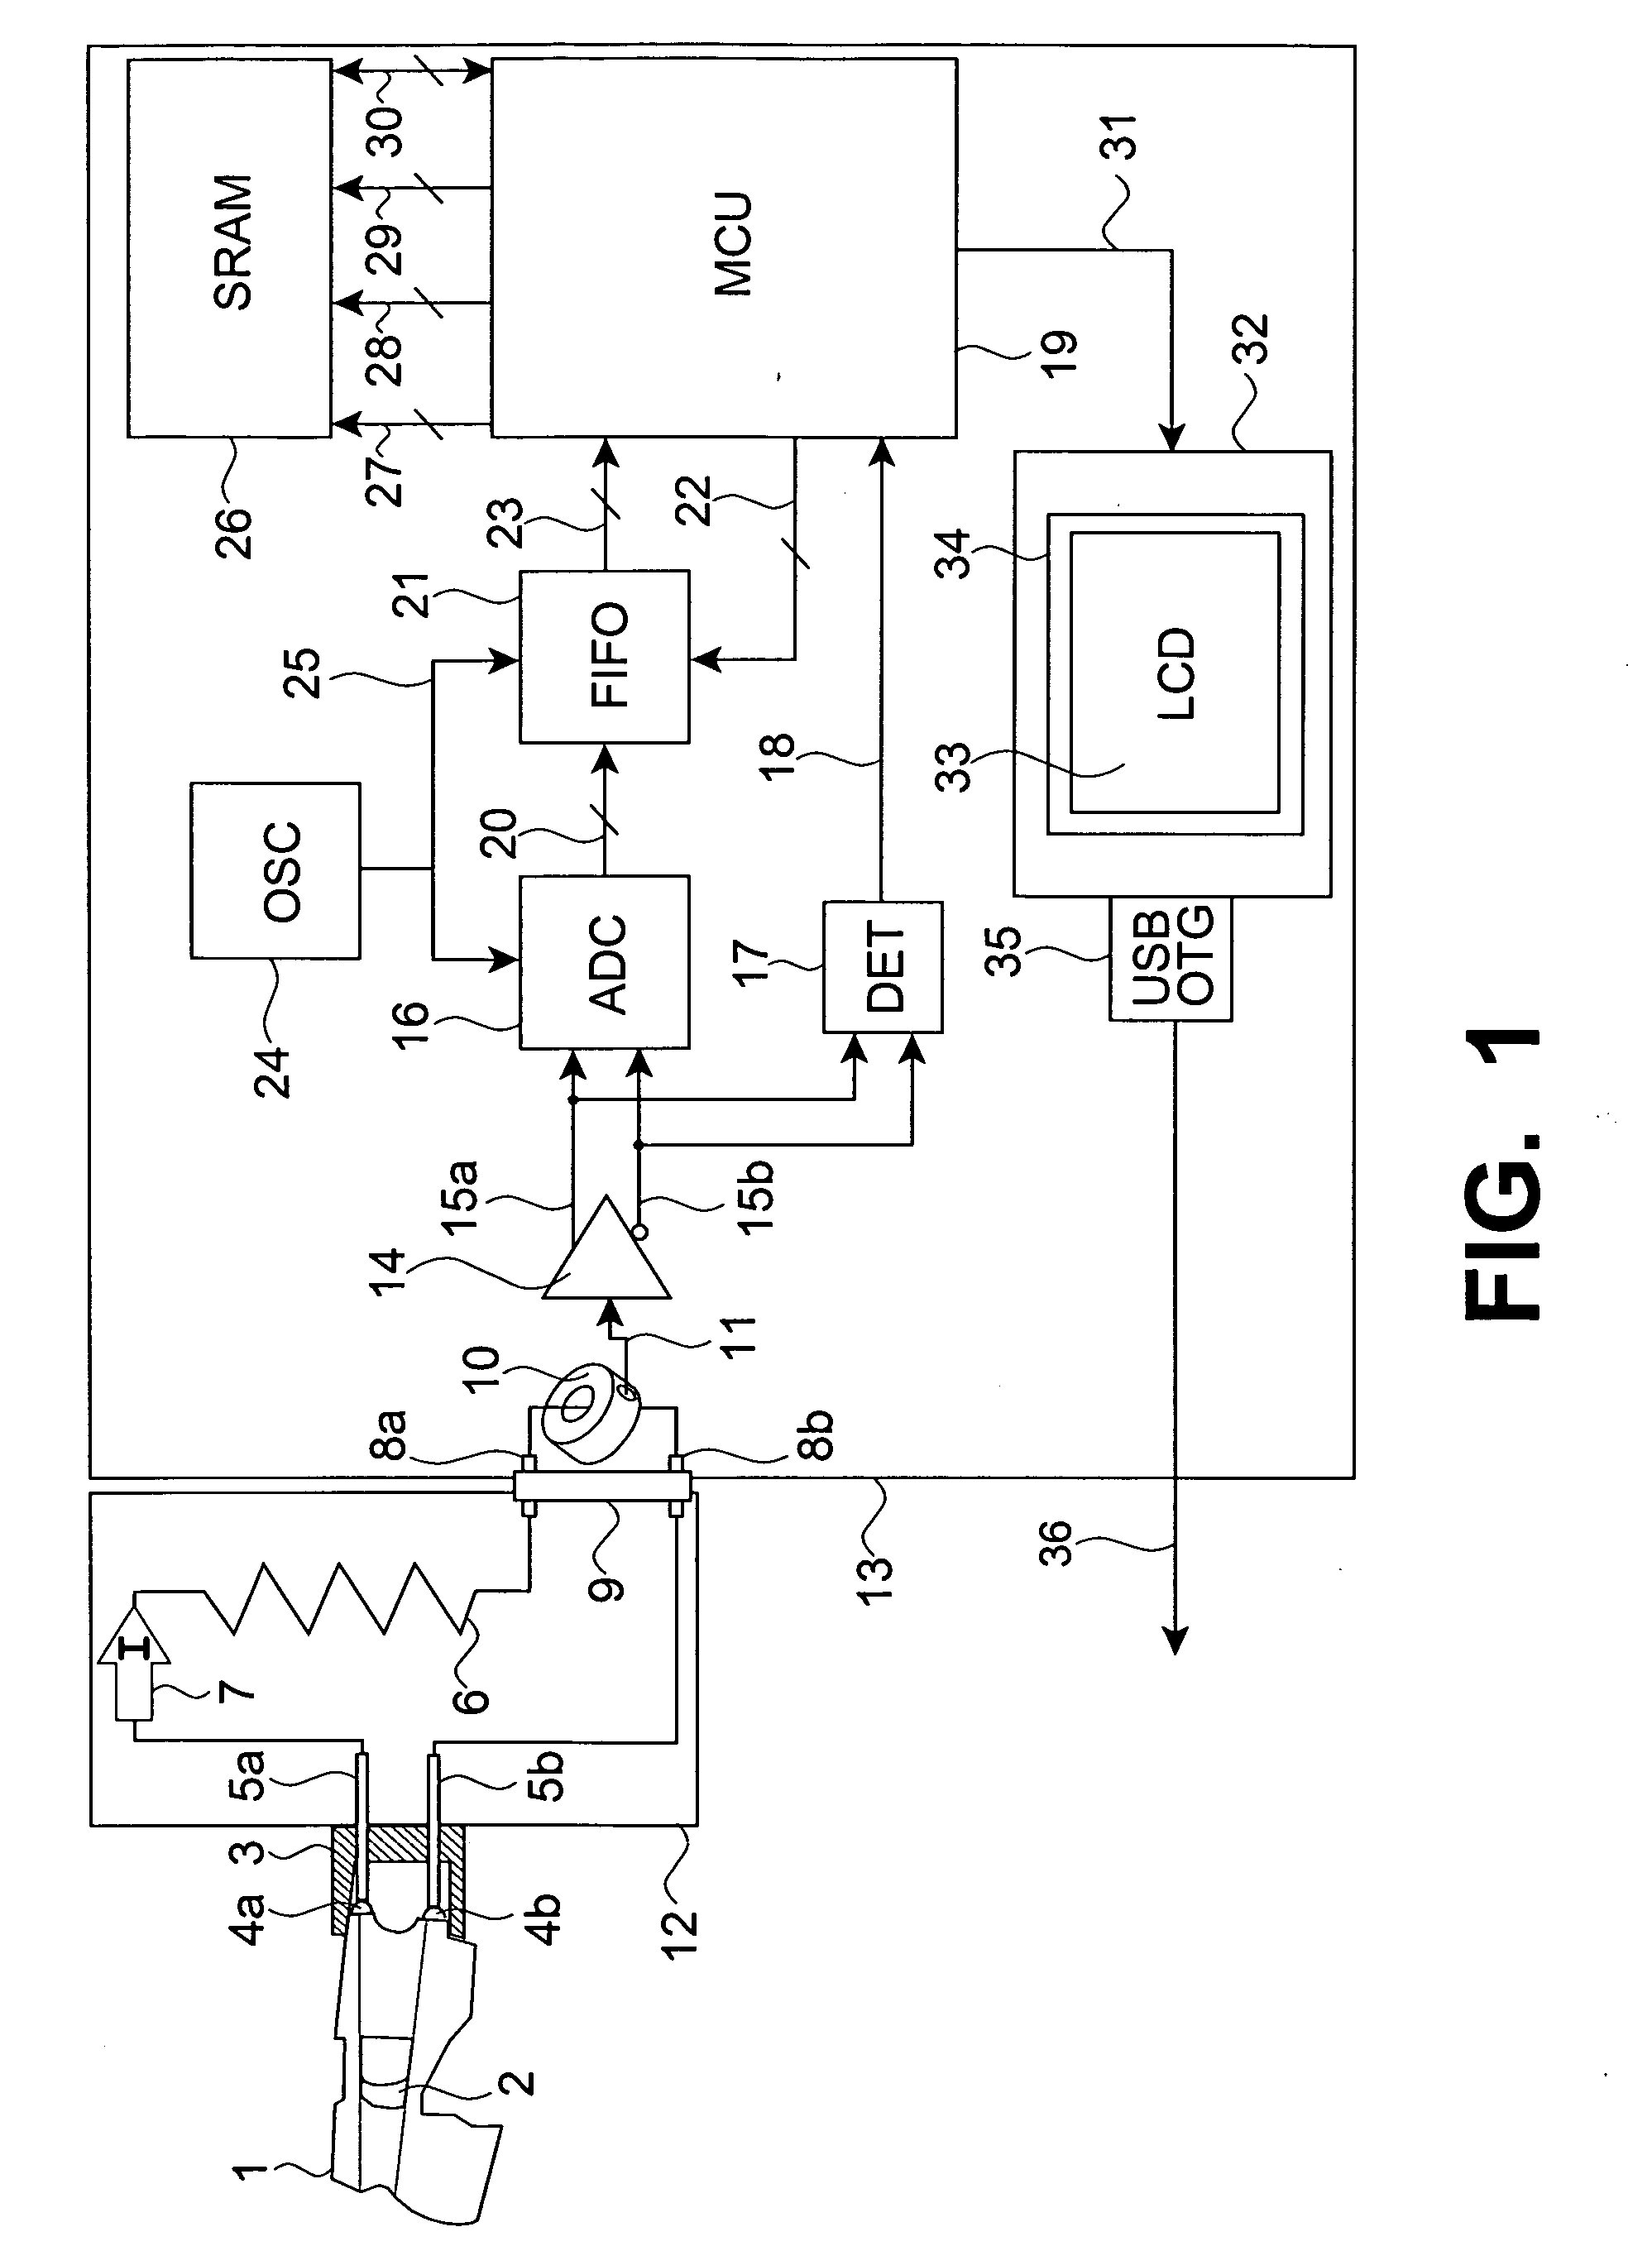 Apparatus for testing a conducted energy weapon